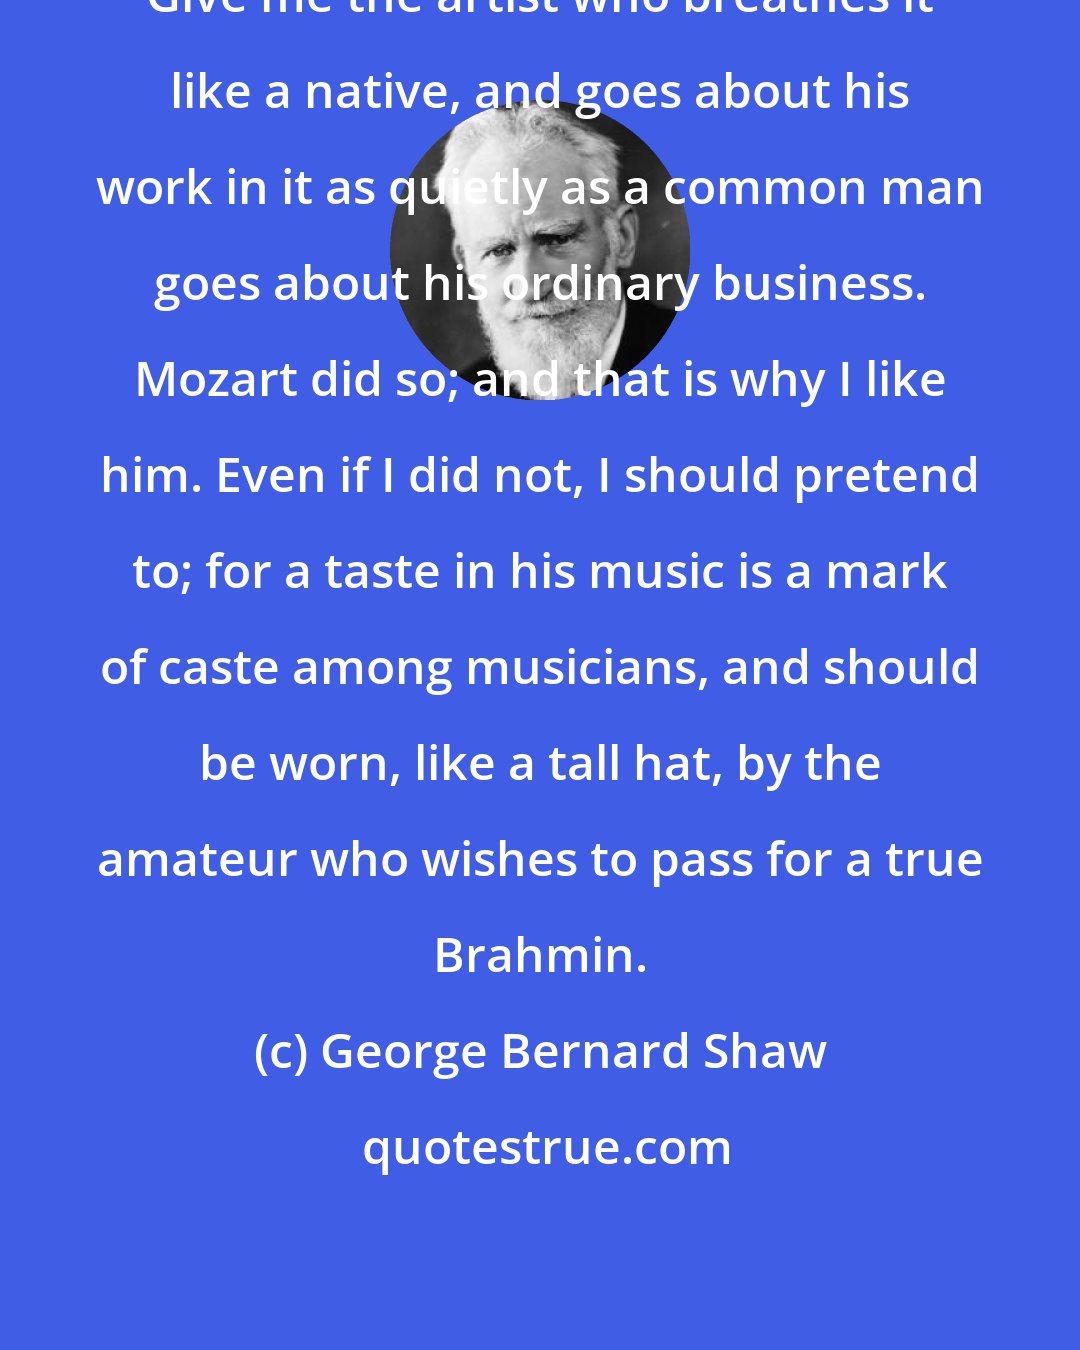 George Bernard Shaw: Give me the artist who breathes it like a native, and goes about his work in it as quietly as a common man goes about his ordinary business. Mozart did so; and that is why I like him. Even if I did not, I should pretend to; for a taste in his music is a mark of caste among musicians, and should be worn, like a tall hat, by the amateur who wishes to pass for a true Brahmin.